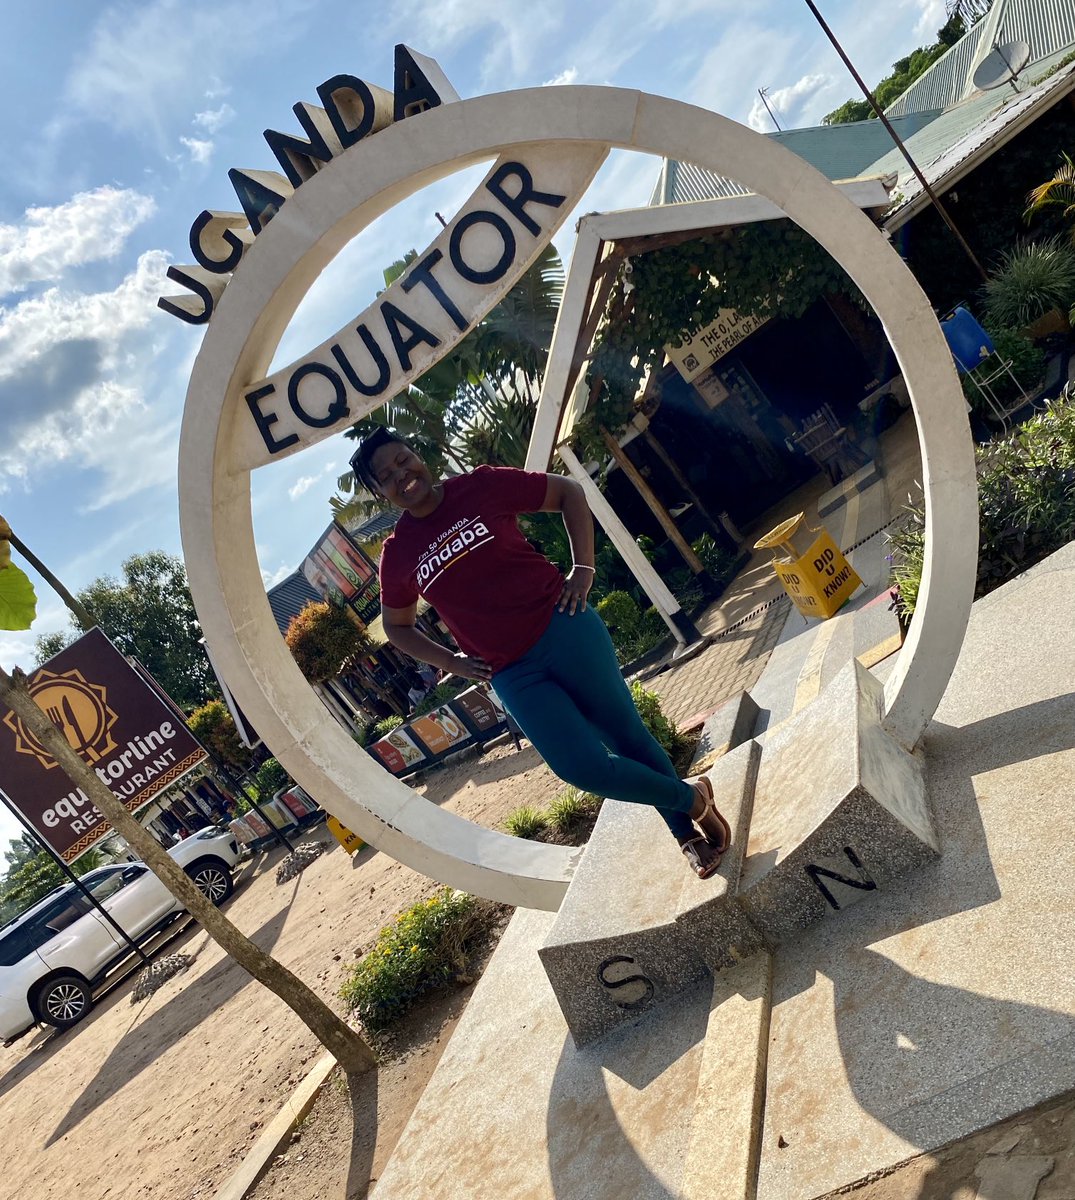 When you can’t work out whether to step in the Northern or Southern Hemisphere and you decide to stay put and be still for a moment! #BeStill #VisitUganda #UgandaEquator #ImSoUganda #Ondaba ⁦@Ondabauganda⁩ ⁦@UdahpUk⁩